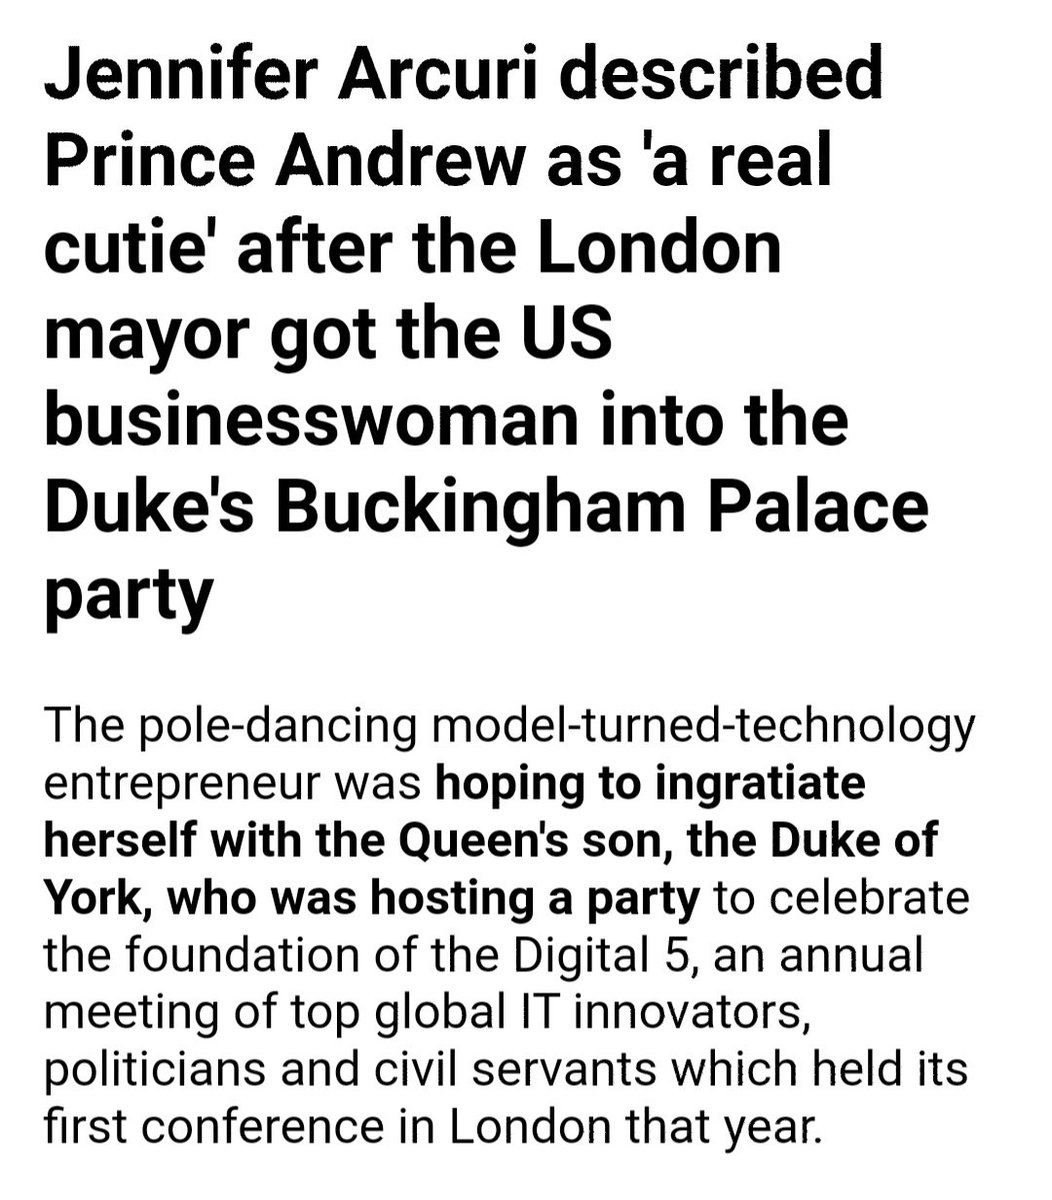 Randy Andy: 'A real cutie'.After Boris arranged for her to be put on the guest list for a party attended by royalty, senior politicians, digiterati and tech startups, Jenny made a bee-line for the Duke of York ...